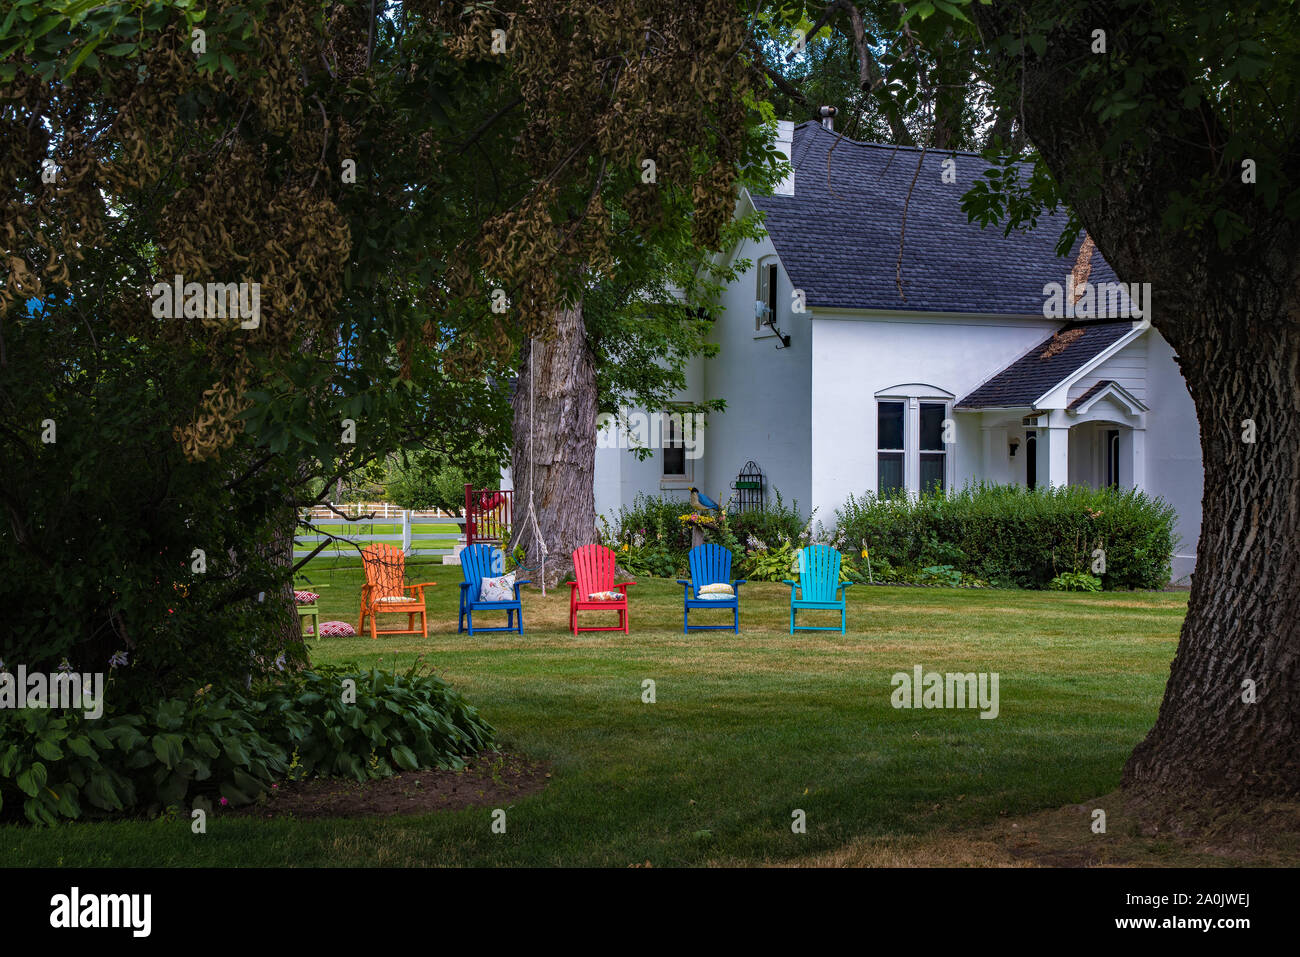 Brightly colored garden chairs add contrast and interest to a rural home and yard. Stock Photo